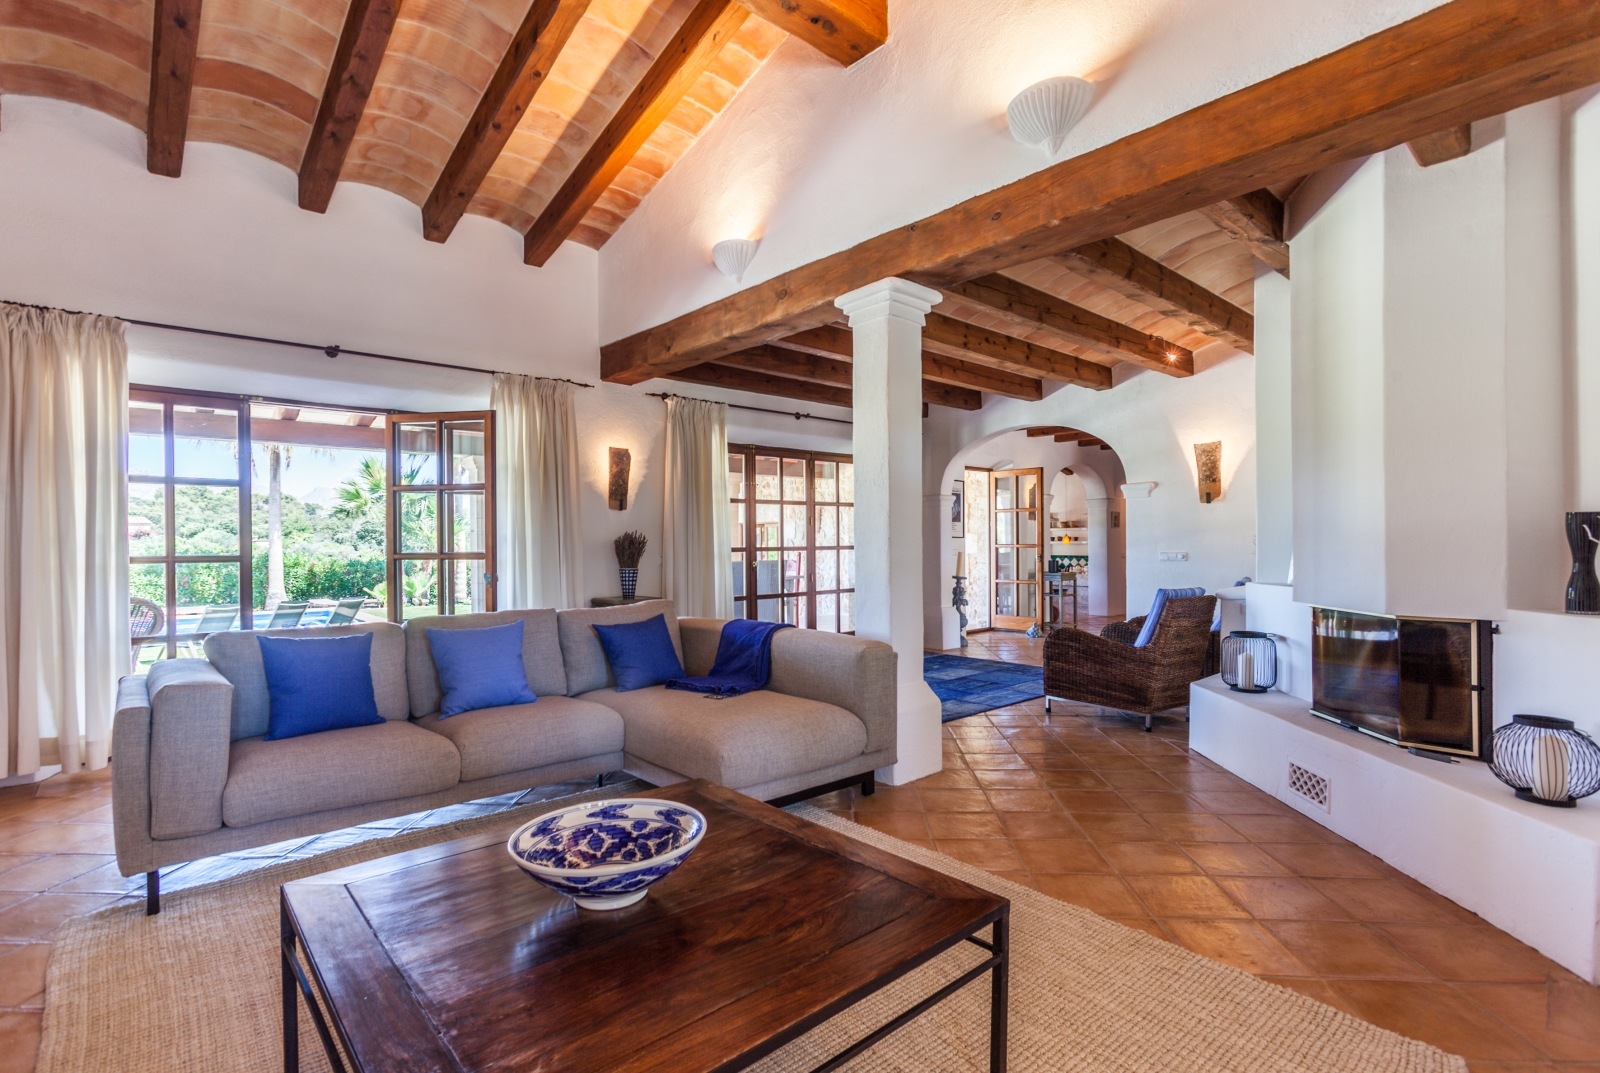 Lounge with sofa, blue cushions, wooden coffee table, fireplace, armchairs and French doors at Can Suelo in Mallorca, Spain